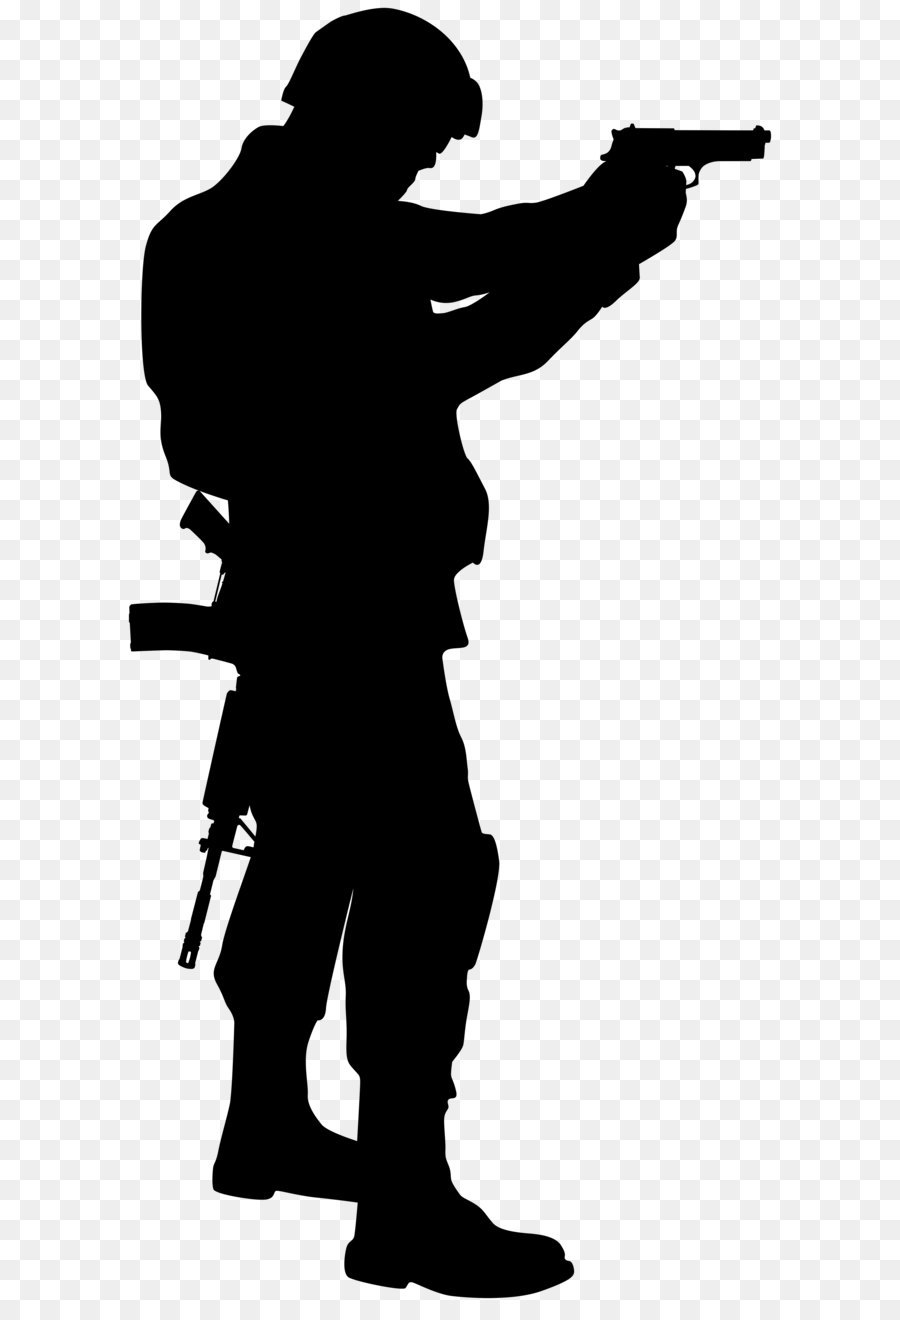 Soldier Silhouette Clip art - Soldier Silhouette Clip Art Image png download - 3981*8000 - Free Transparent Soldier png Download.